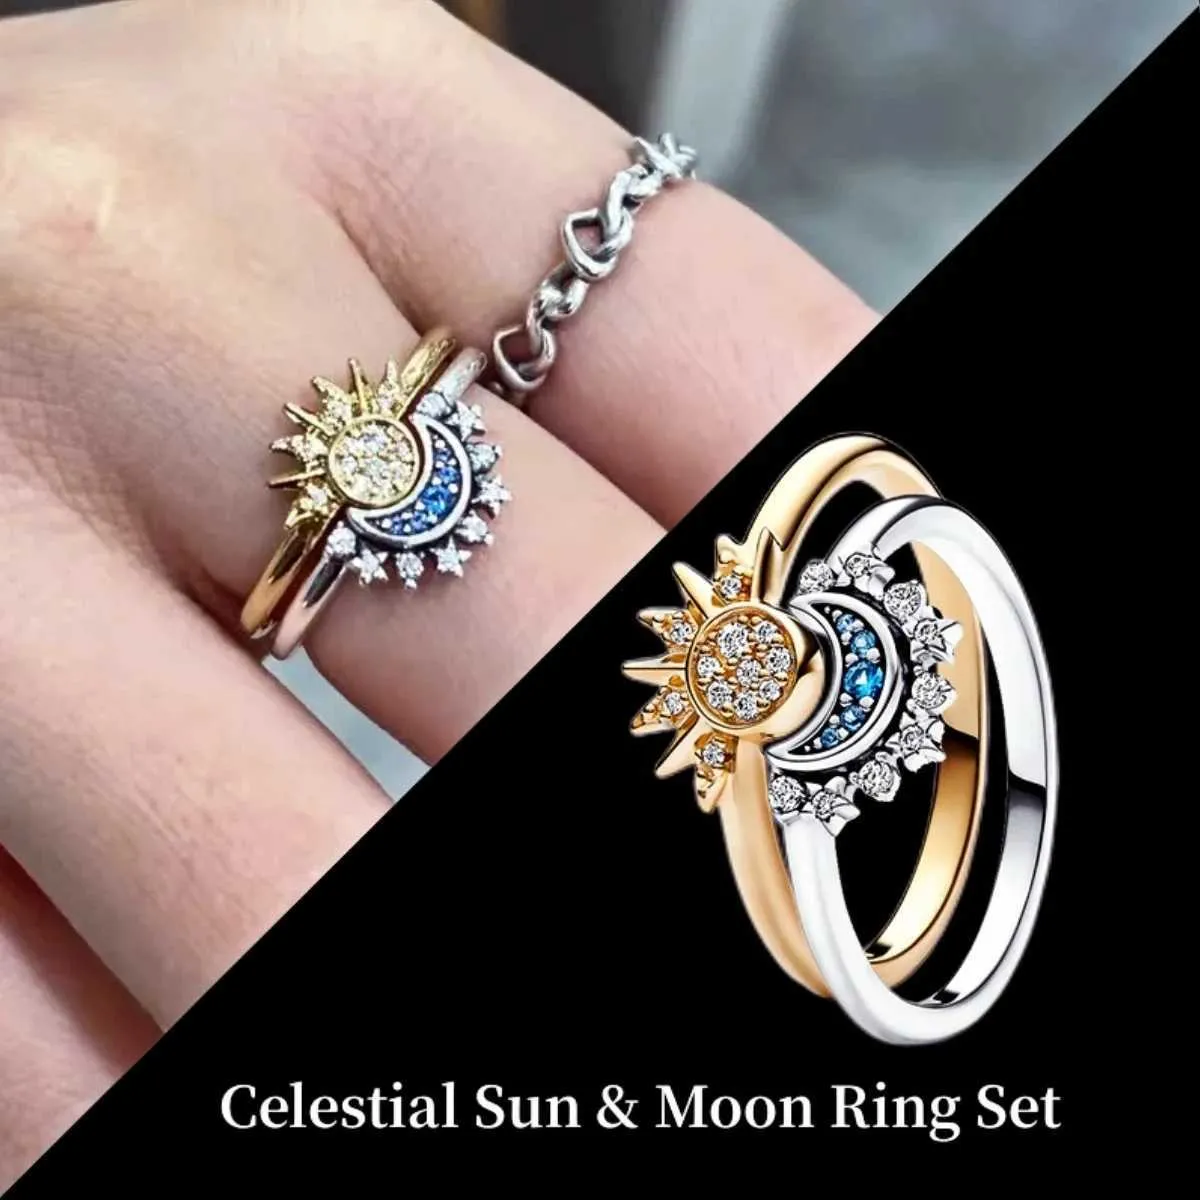 Band Rings Hot selling 925 sterling silver gold moon and sun ring set diamond heart sparkling ring exquisite jewelry for women charming party giftsL40402